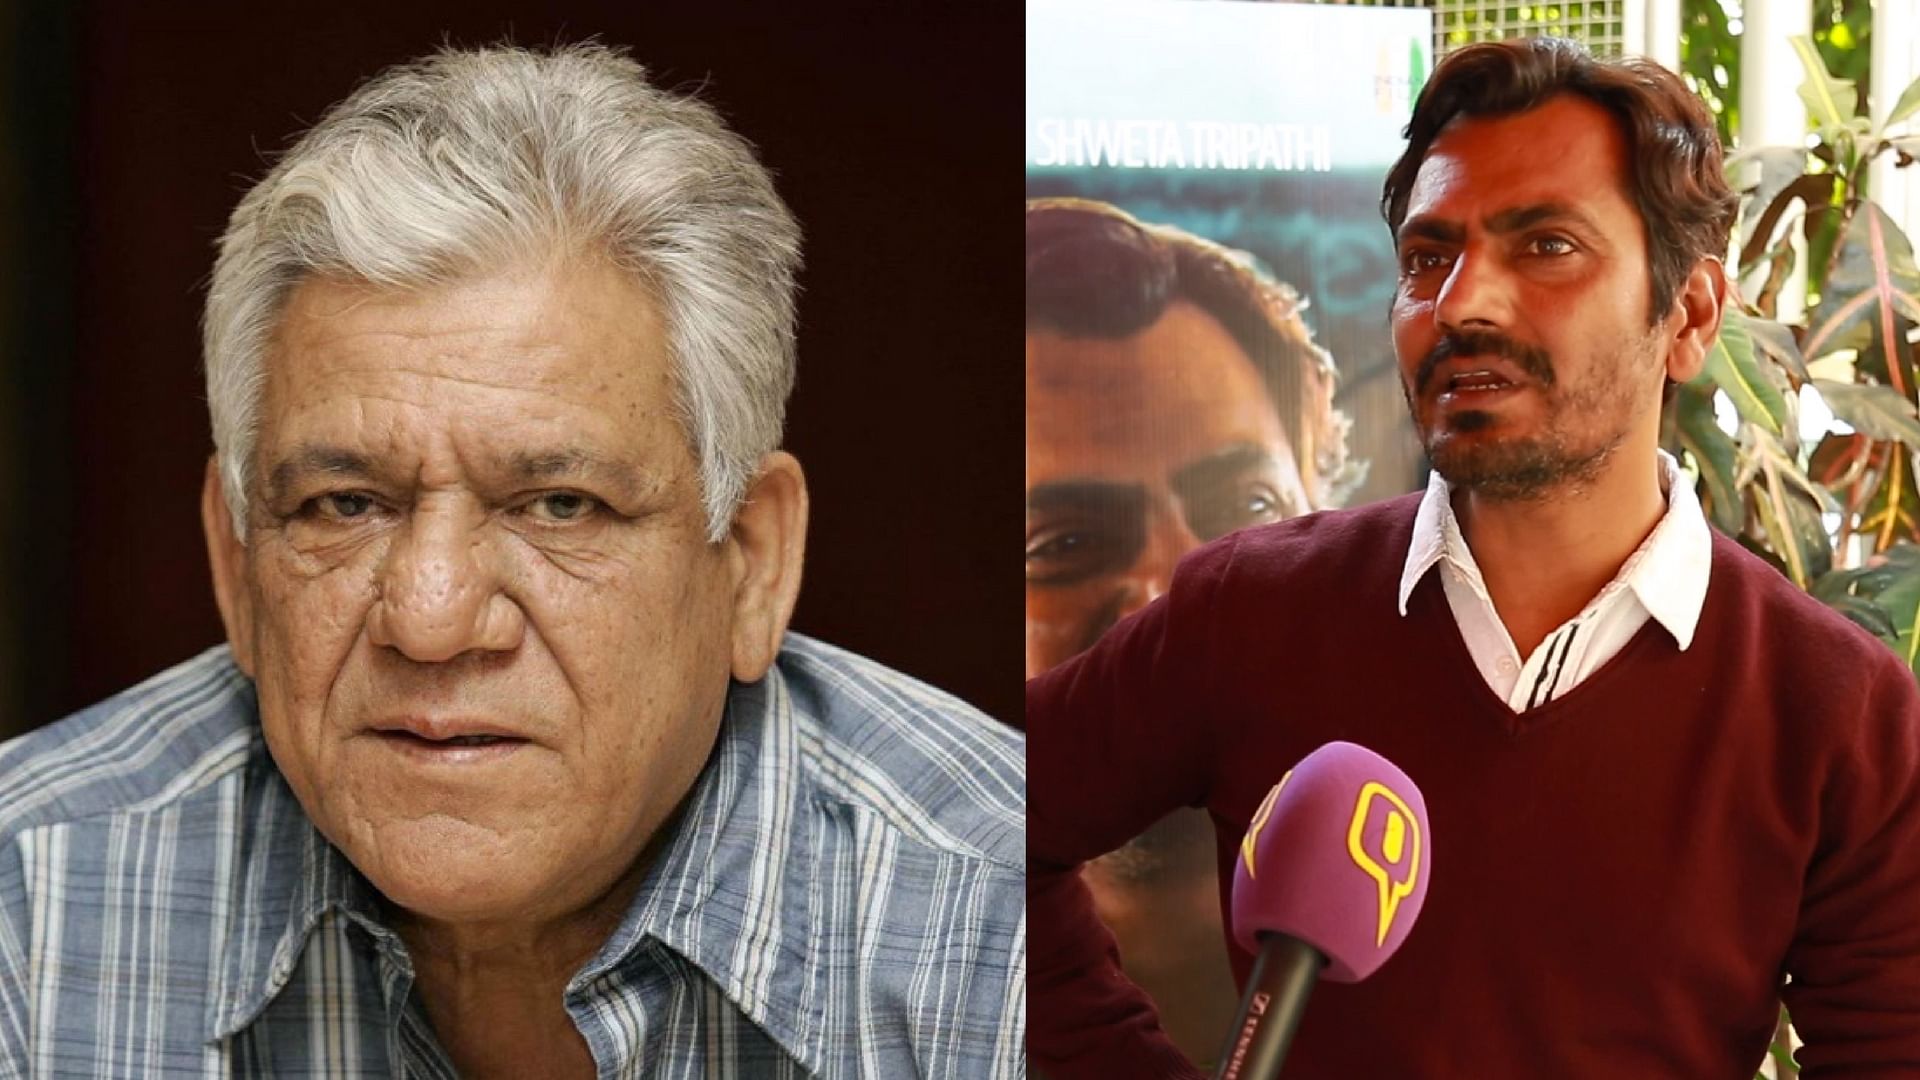 Nawazuddin remembers Om Puri (Photo Courtesy: Twitter/@anilkapoor and The Quint)